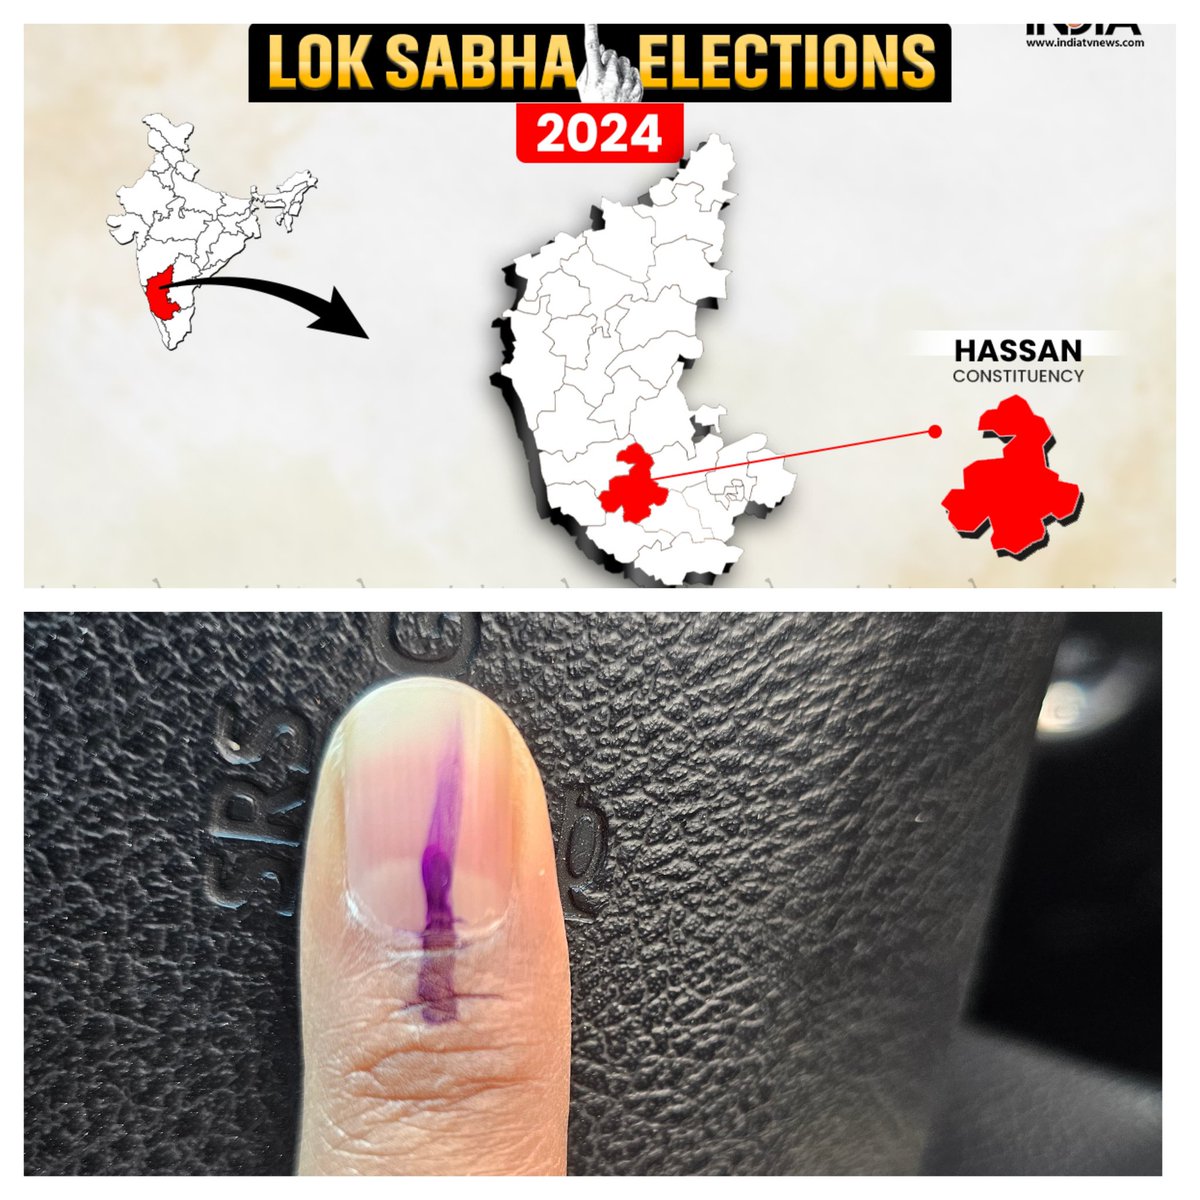 Exercise your right! Your vote is our future #KarnatakaElections #LokSabhaElection2024